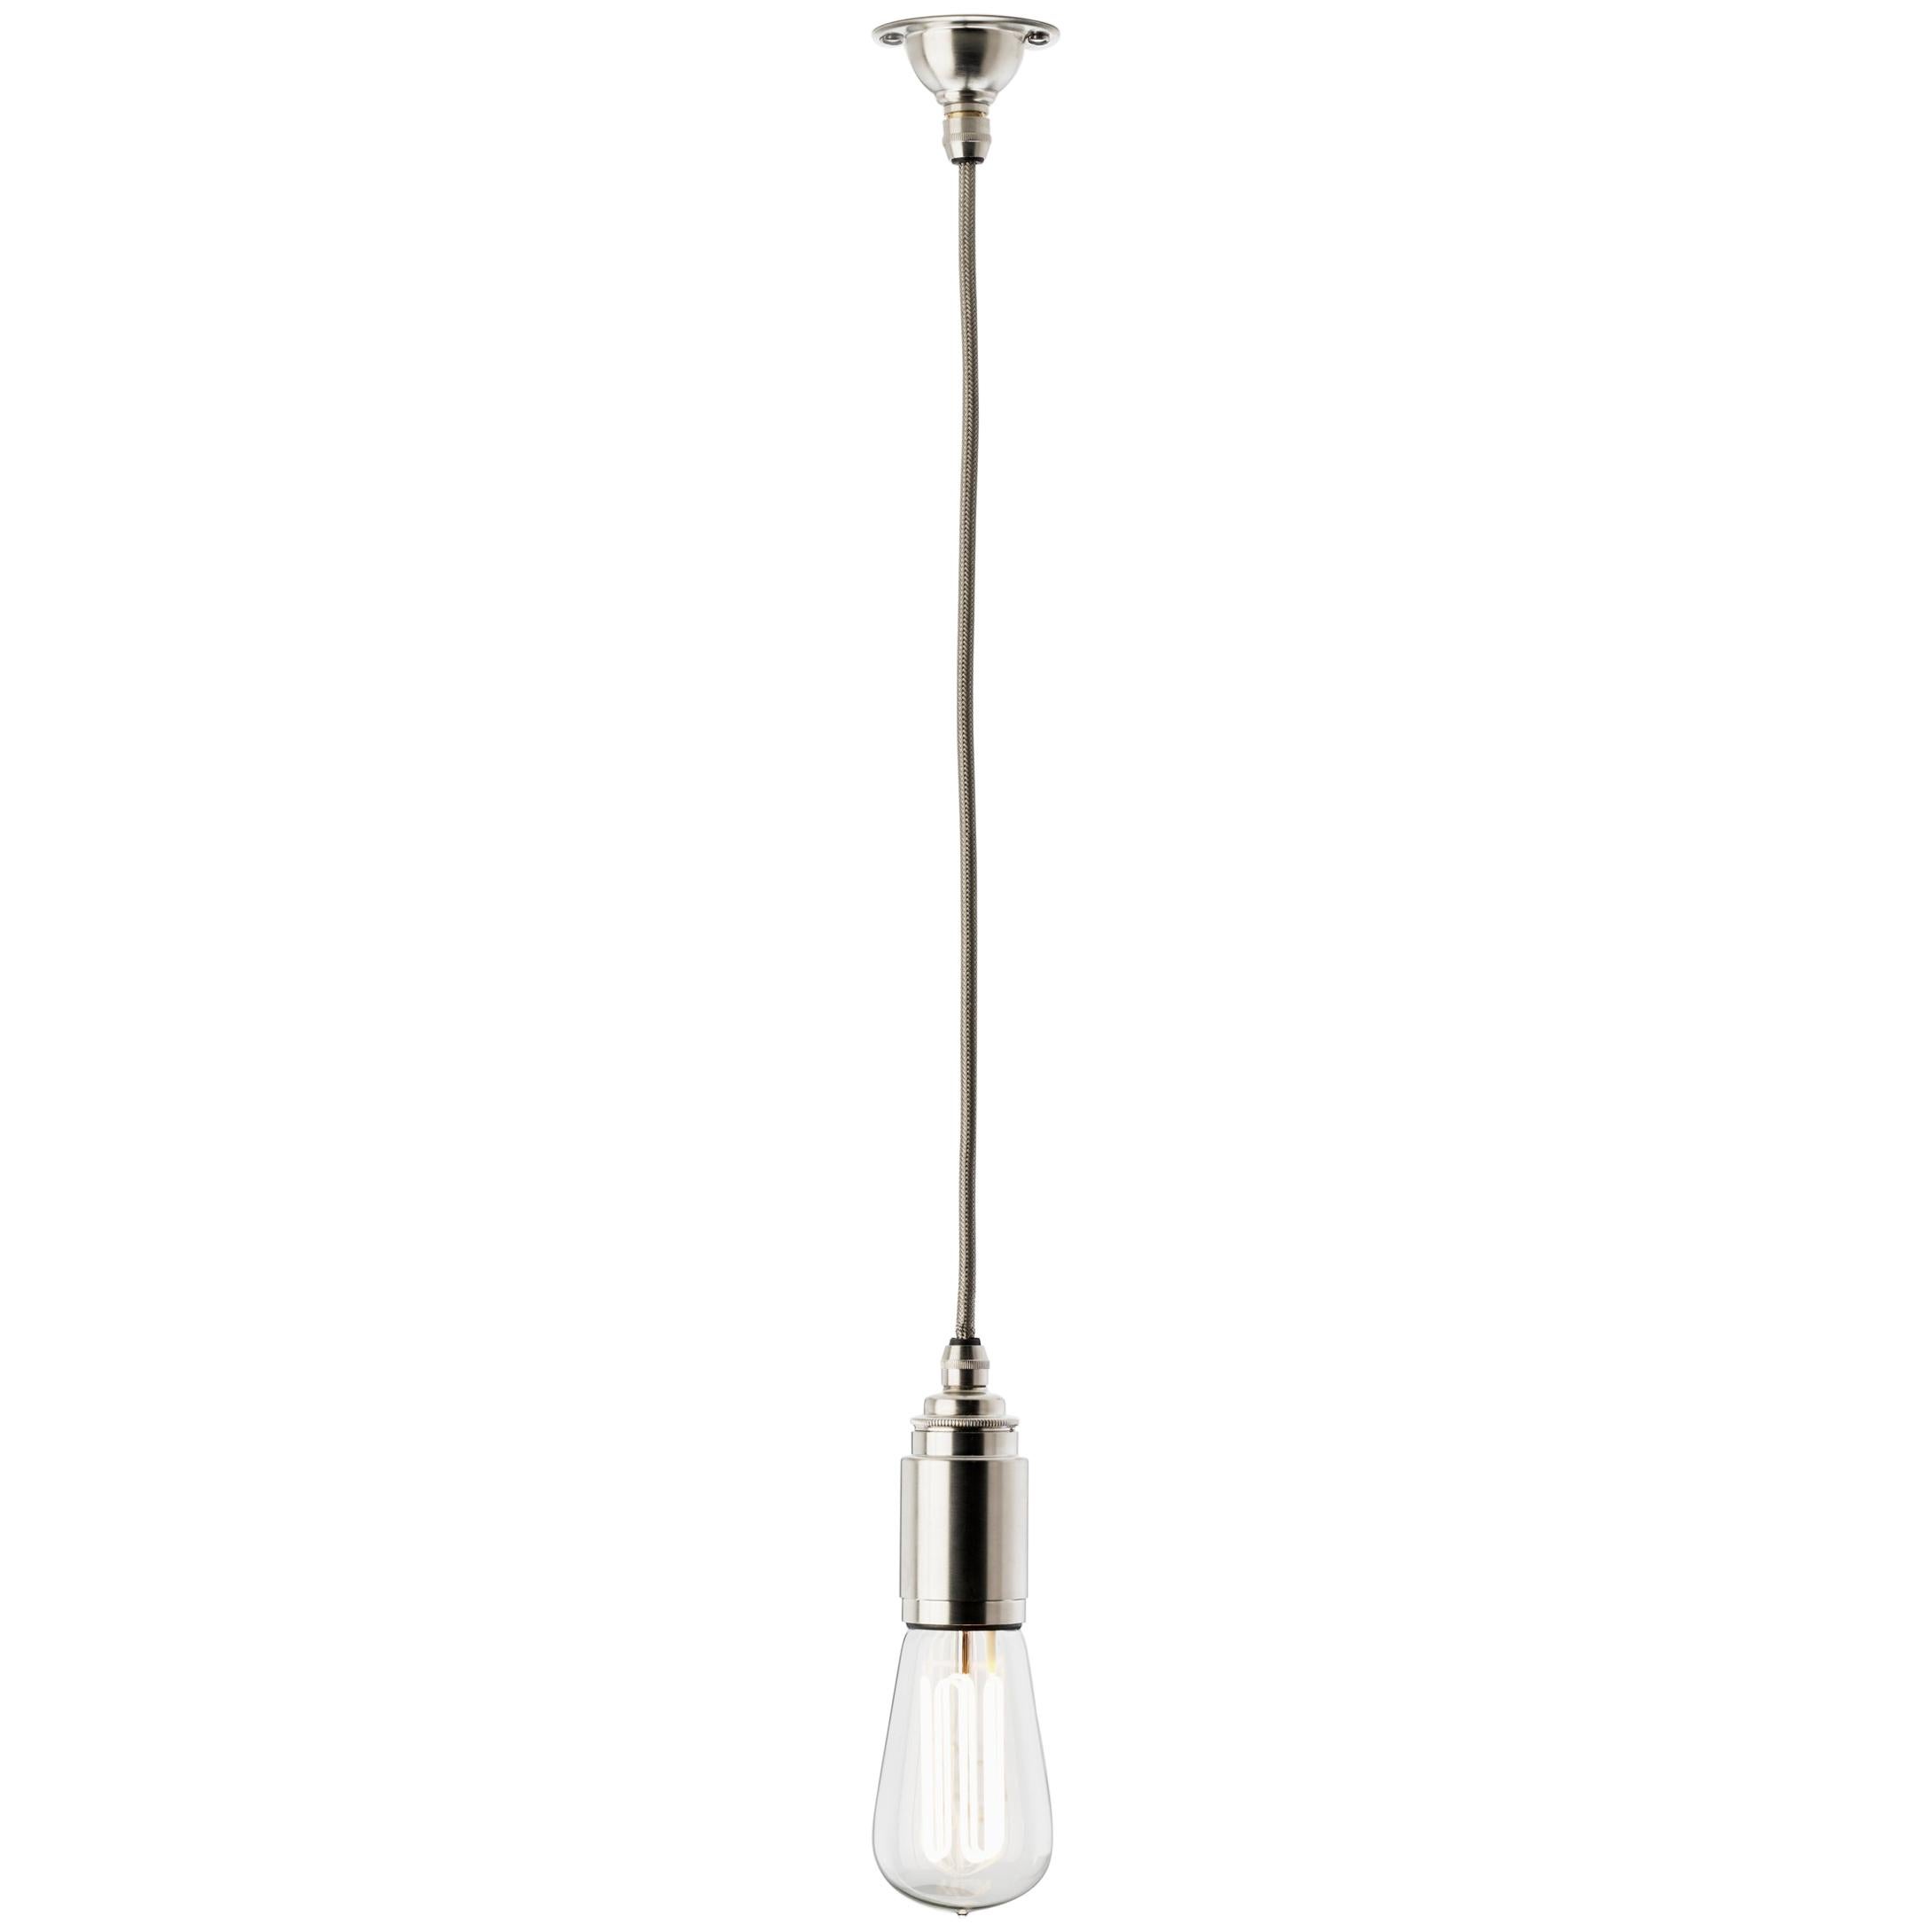 Tekna Thorn Pete Grip-C Pendant Light with Brushed Nickel Finish & Ceiling Plate